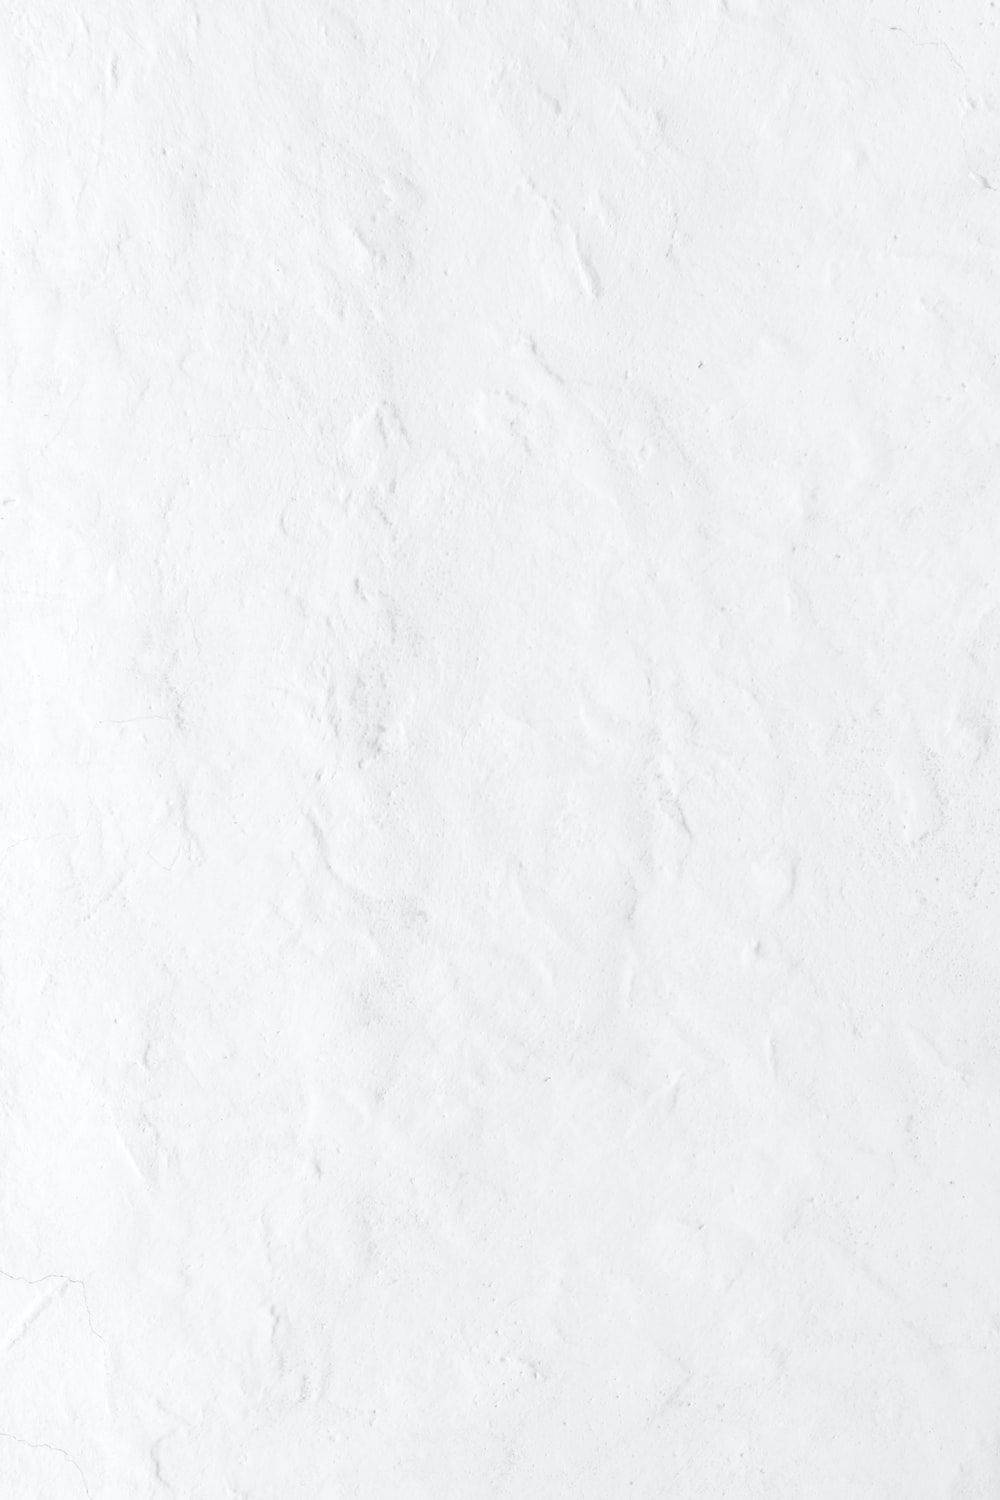 Blank White Cracked Paint Texture Wallpaper